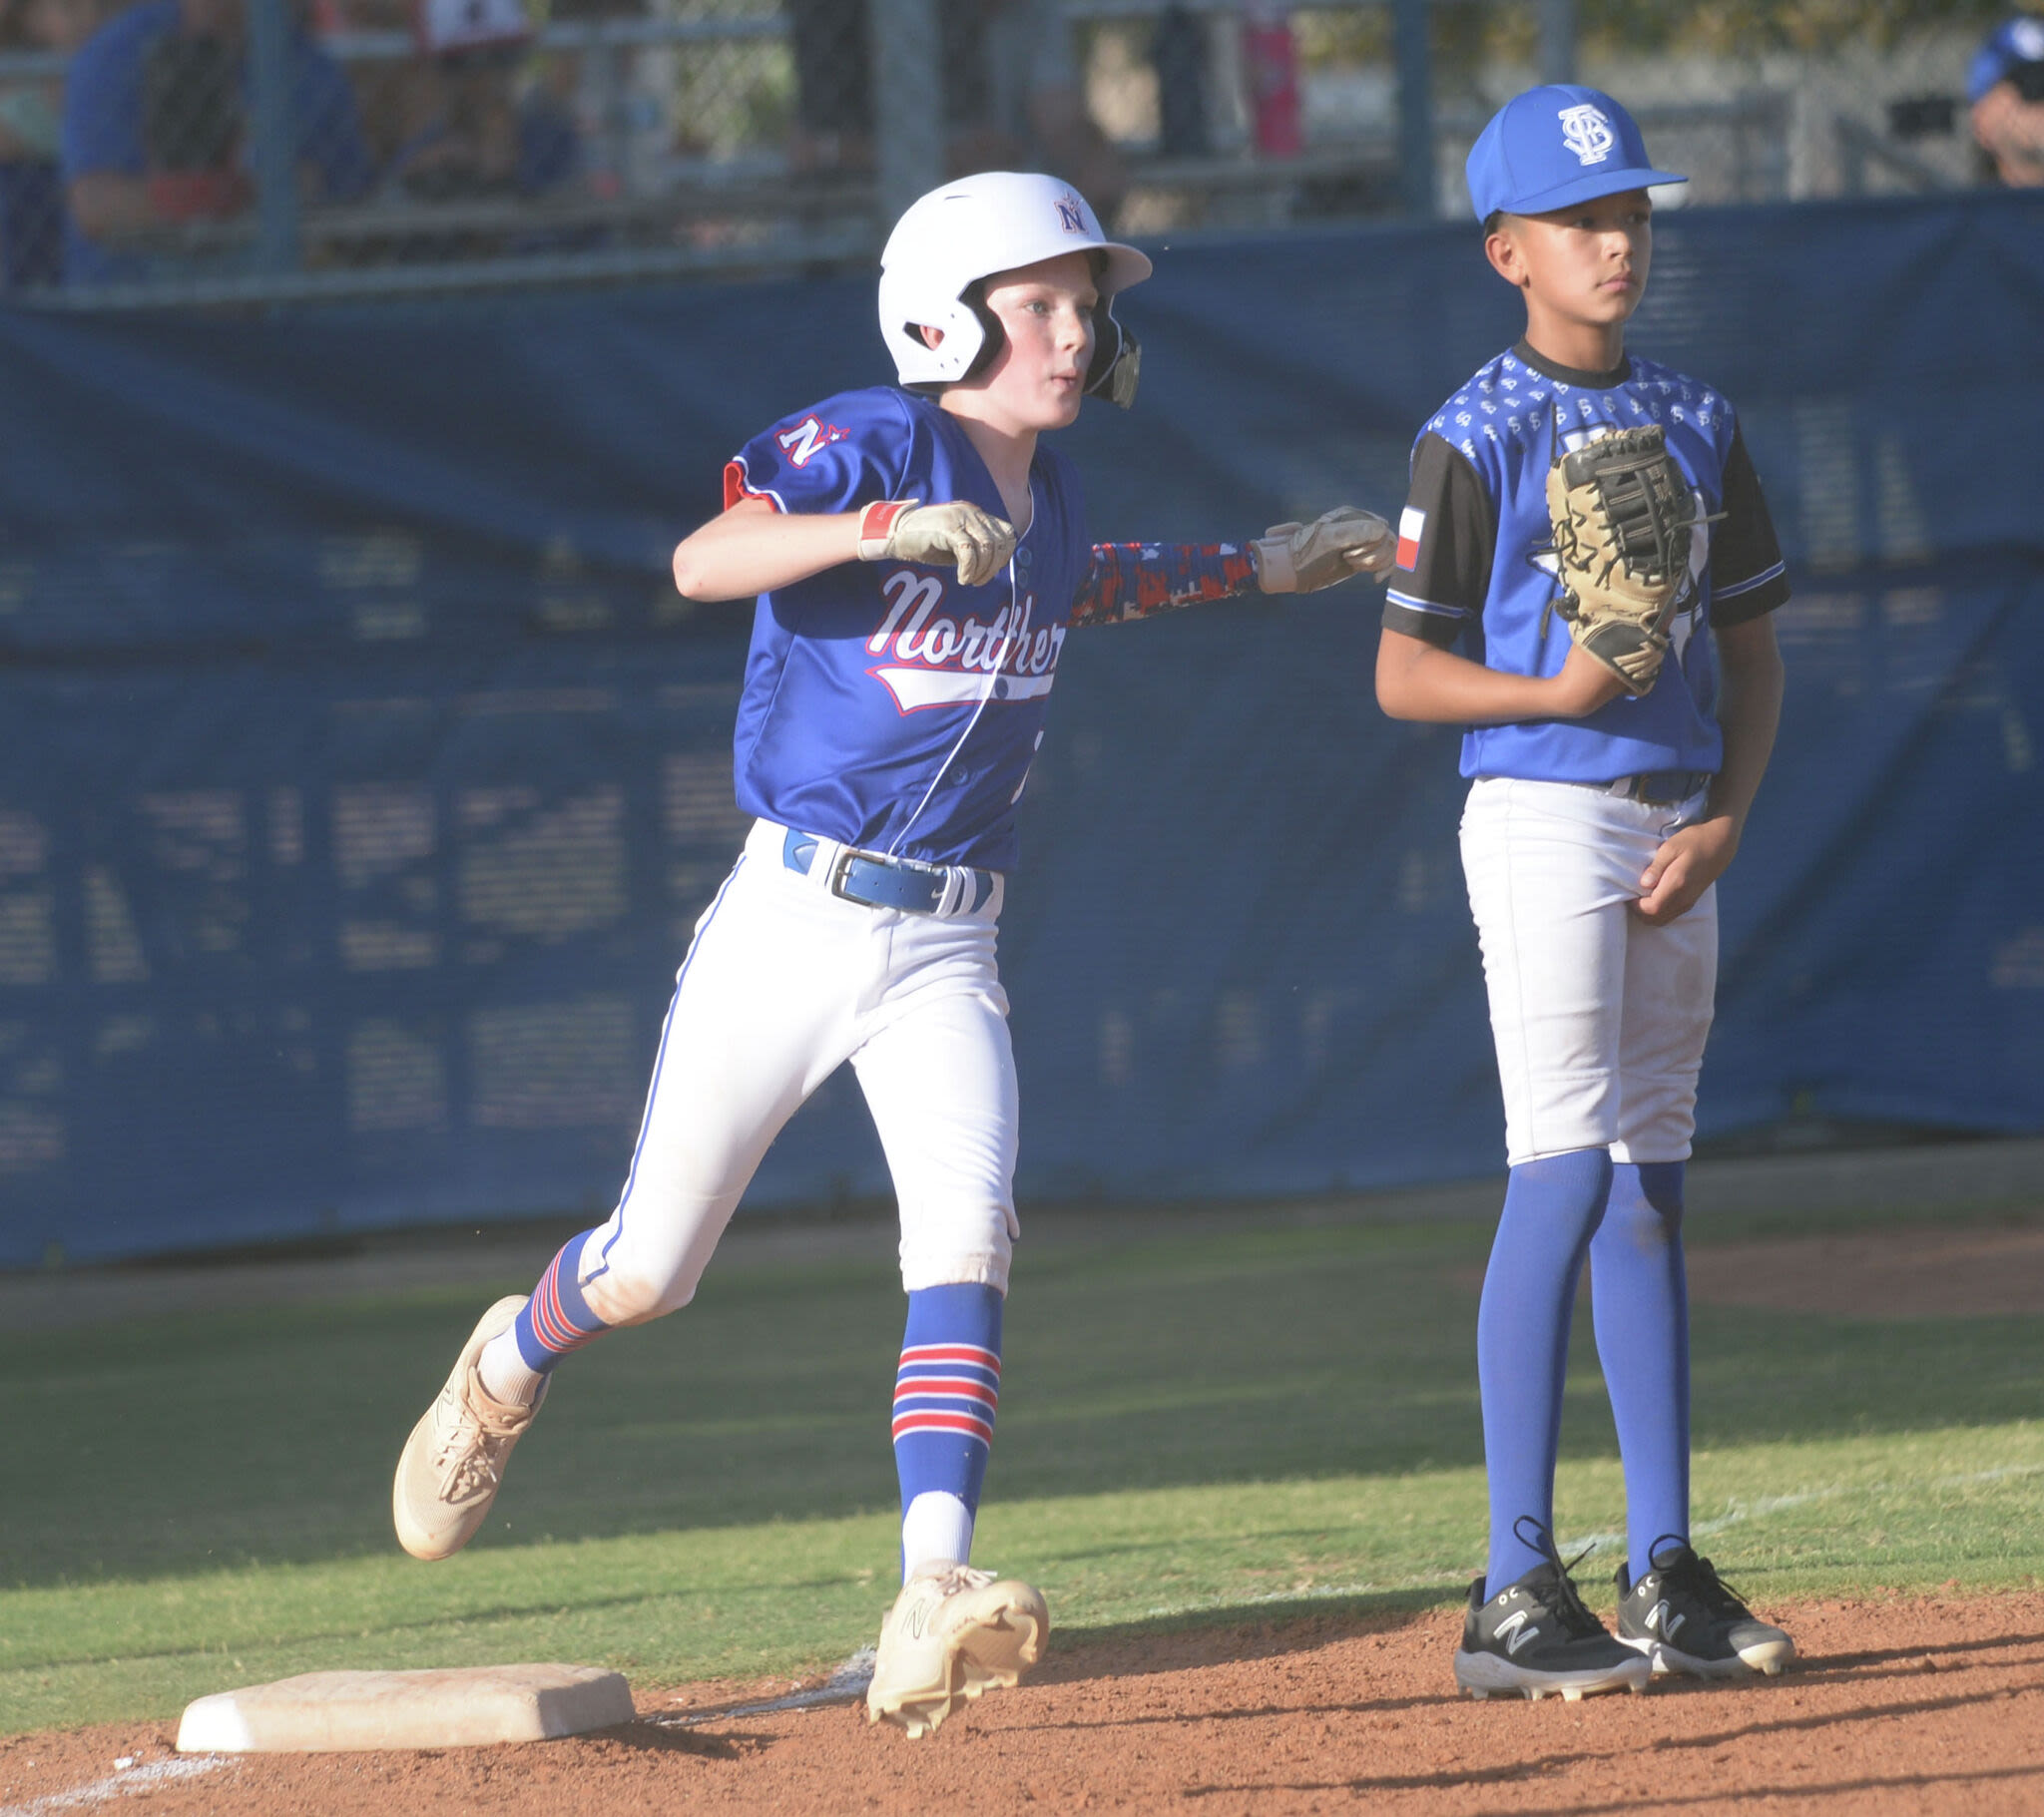 LITTLE LEAGUE: Northern all-star teams eliminated at state tourney